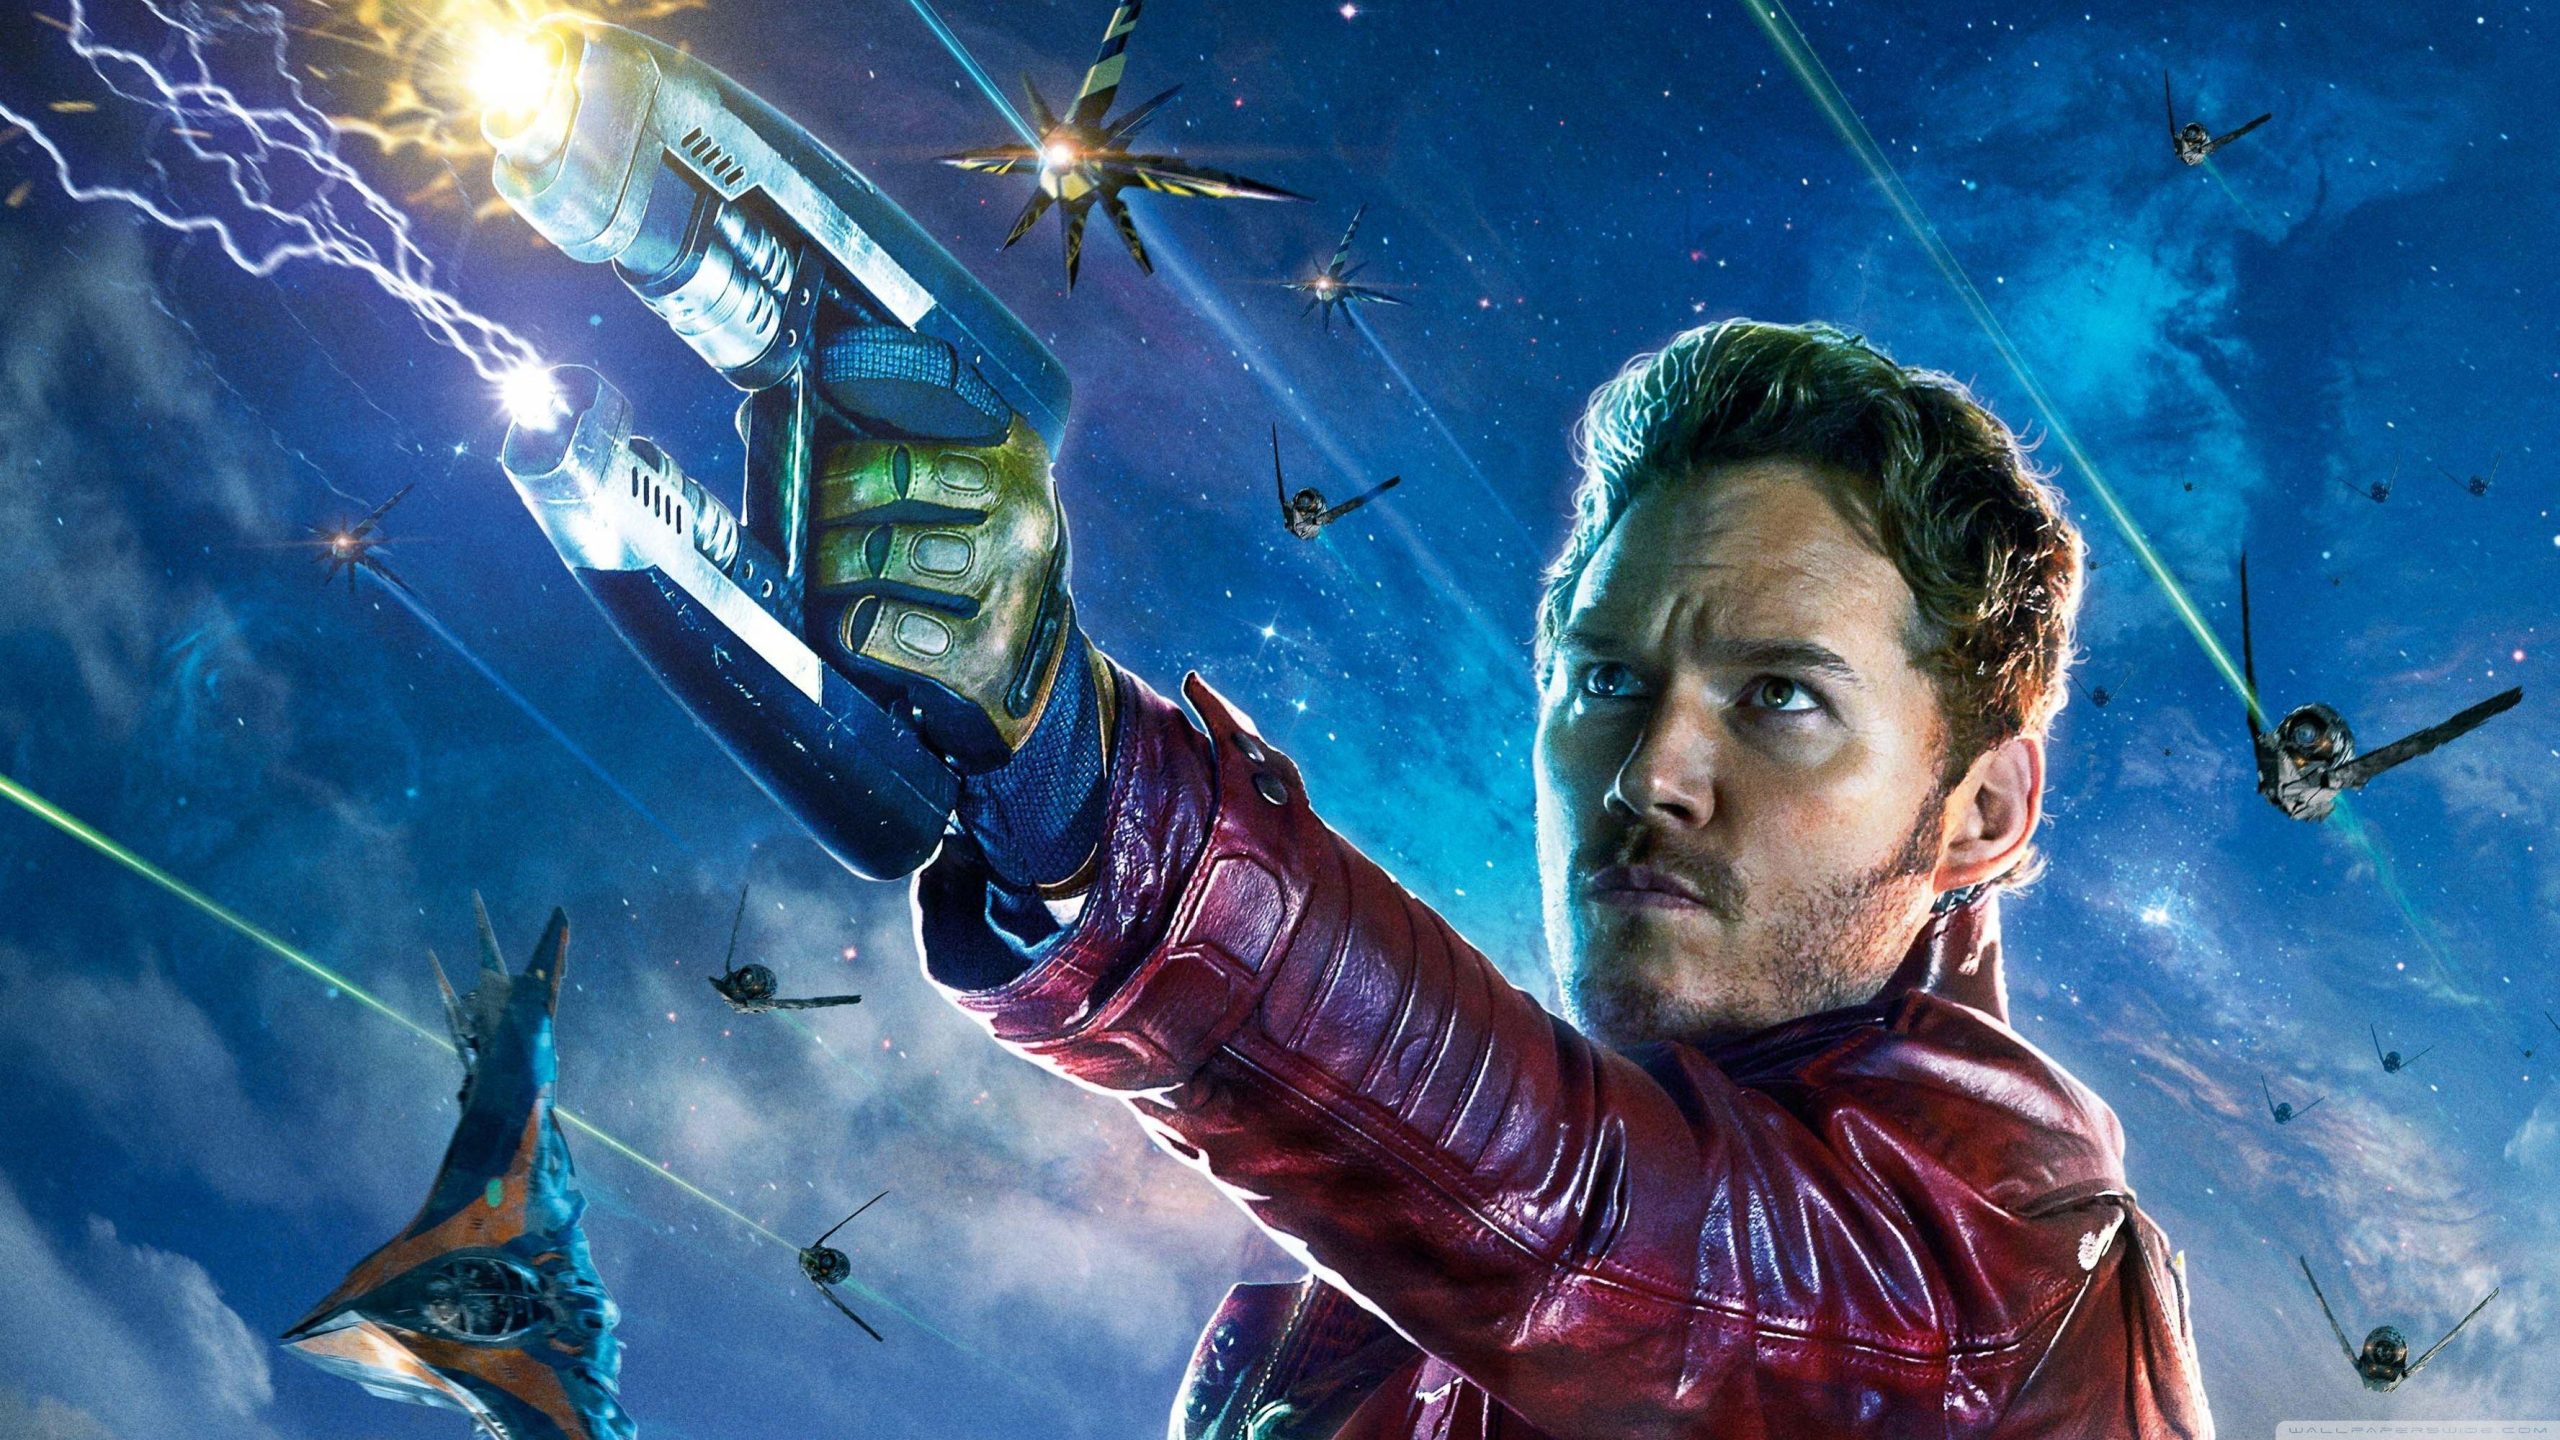 Guardians Of The Galaxy Star-Lord Wallpaper Phone, Guardians Of The Galaxy Star-Lord, Movies